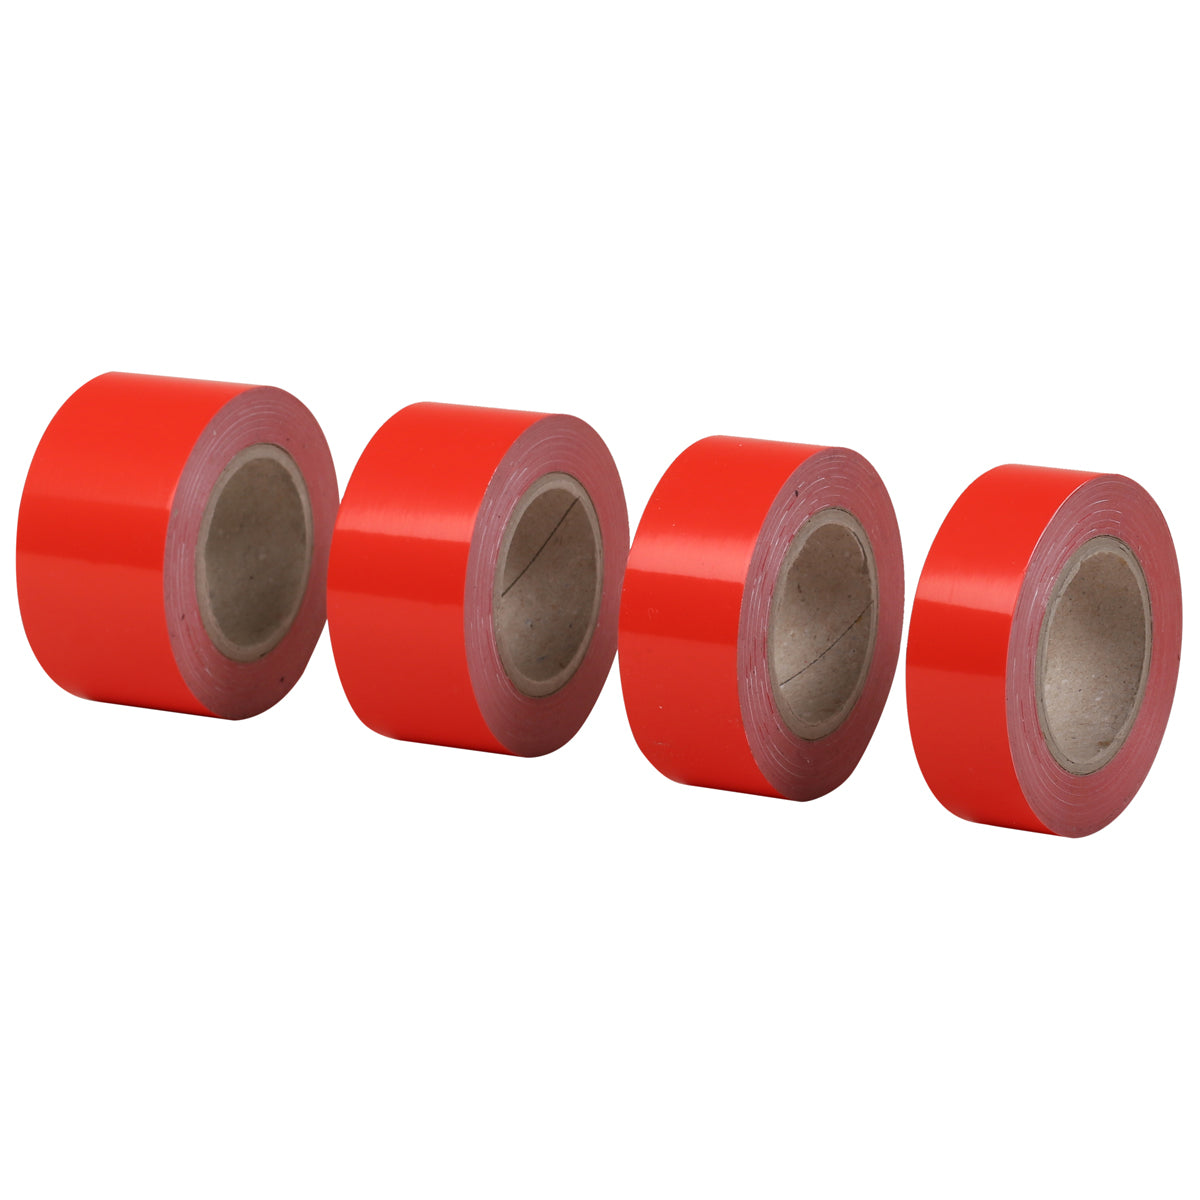 Zefal Tubeless Tape x 9M - 20mm